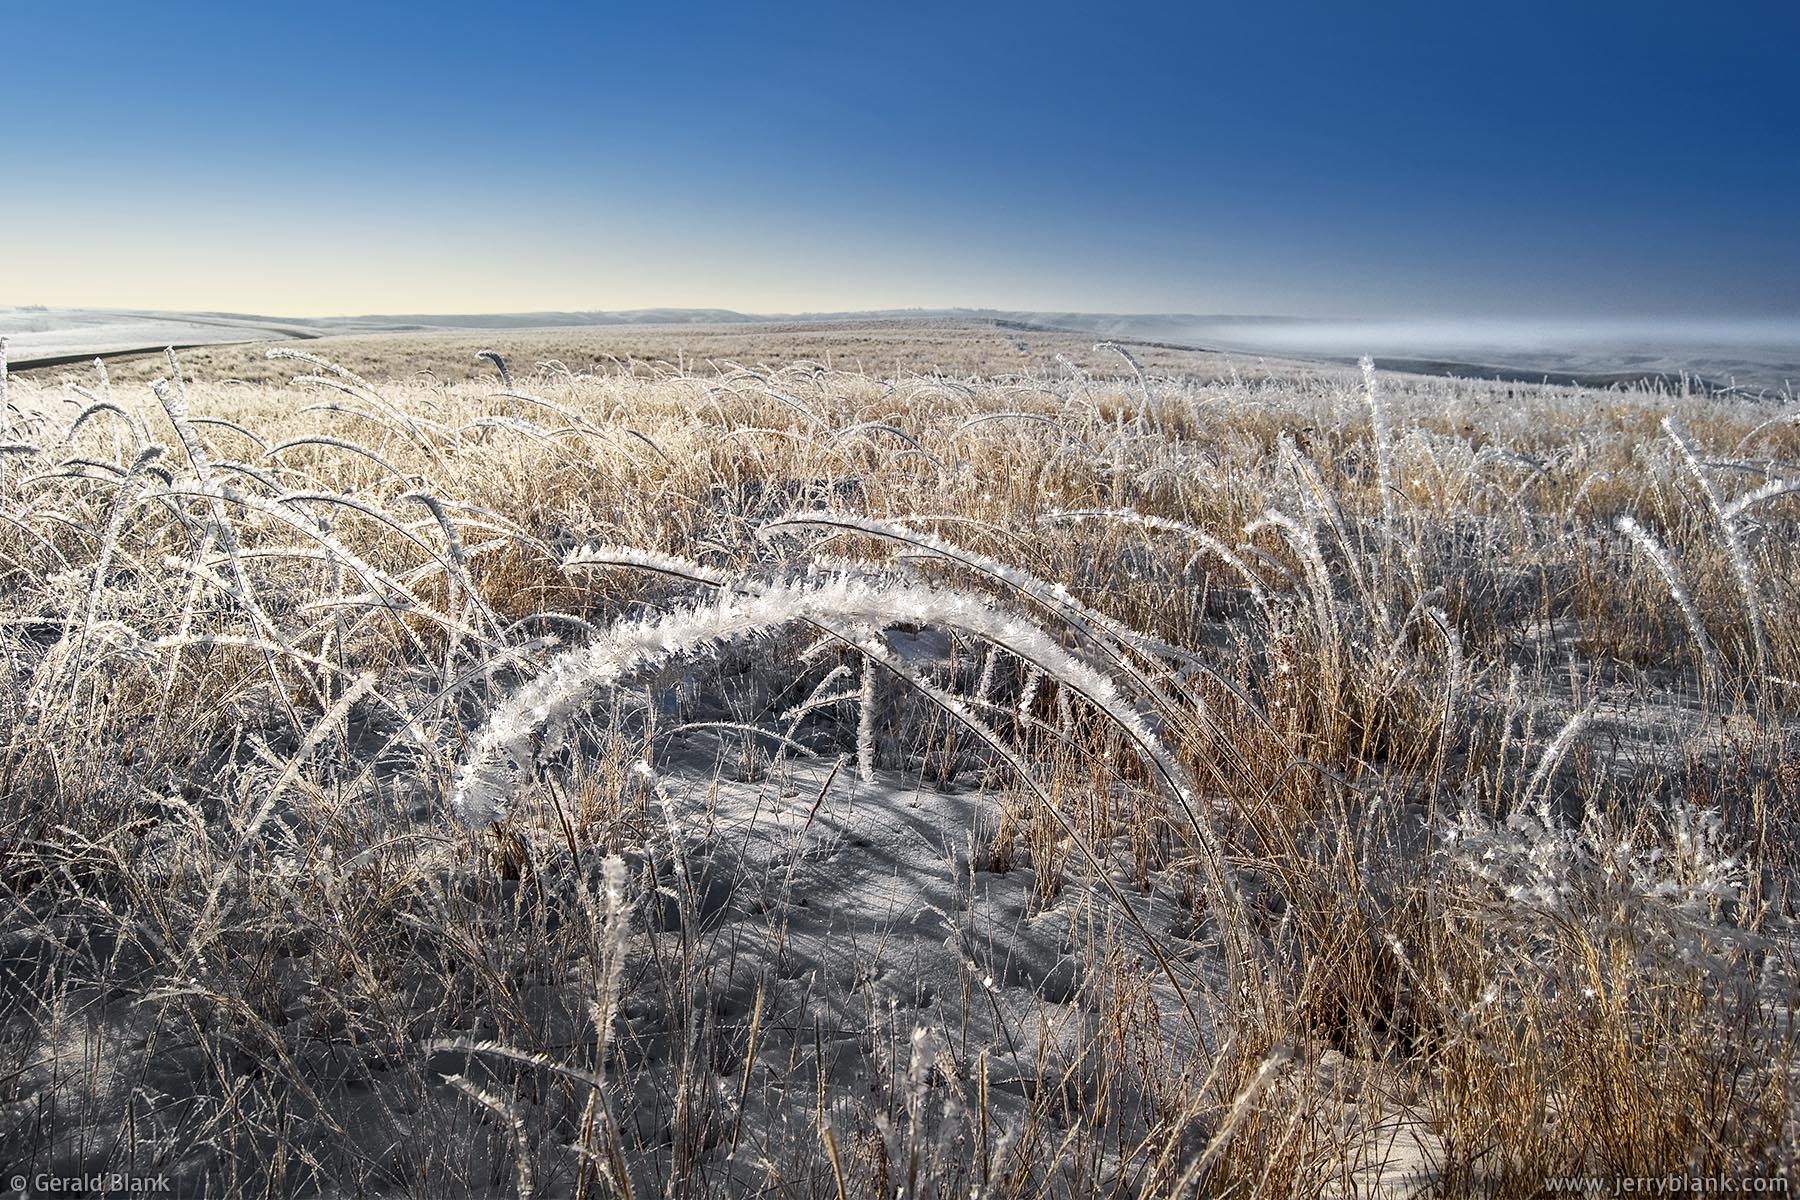 #03249 - Early morning hoarfrost in the Little Missouri National Grassland, east of Tobacco Garden Bay in McKenzie County, North Dakota - photo by Jerry Blank